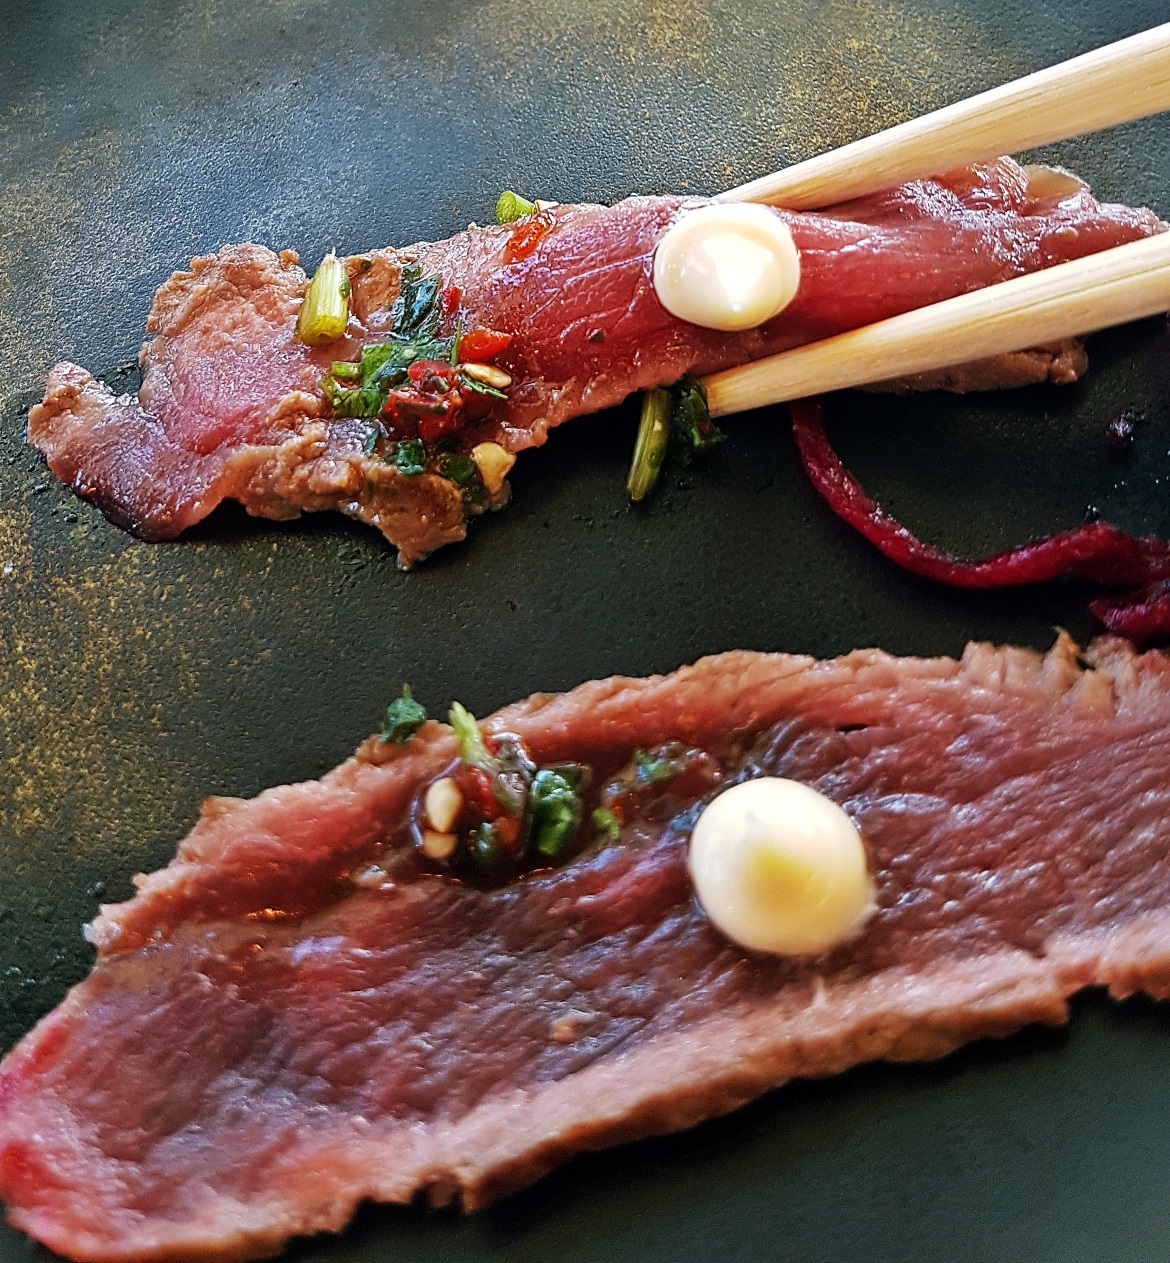 Beef tataki - Wagamama Menu Pairing, Review by BeckyBecky Blogs